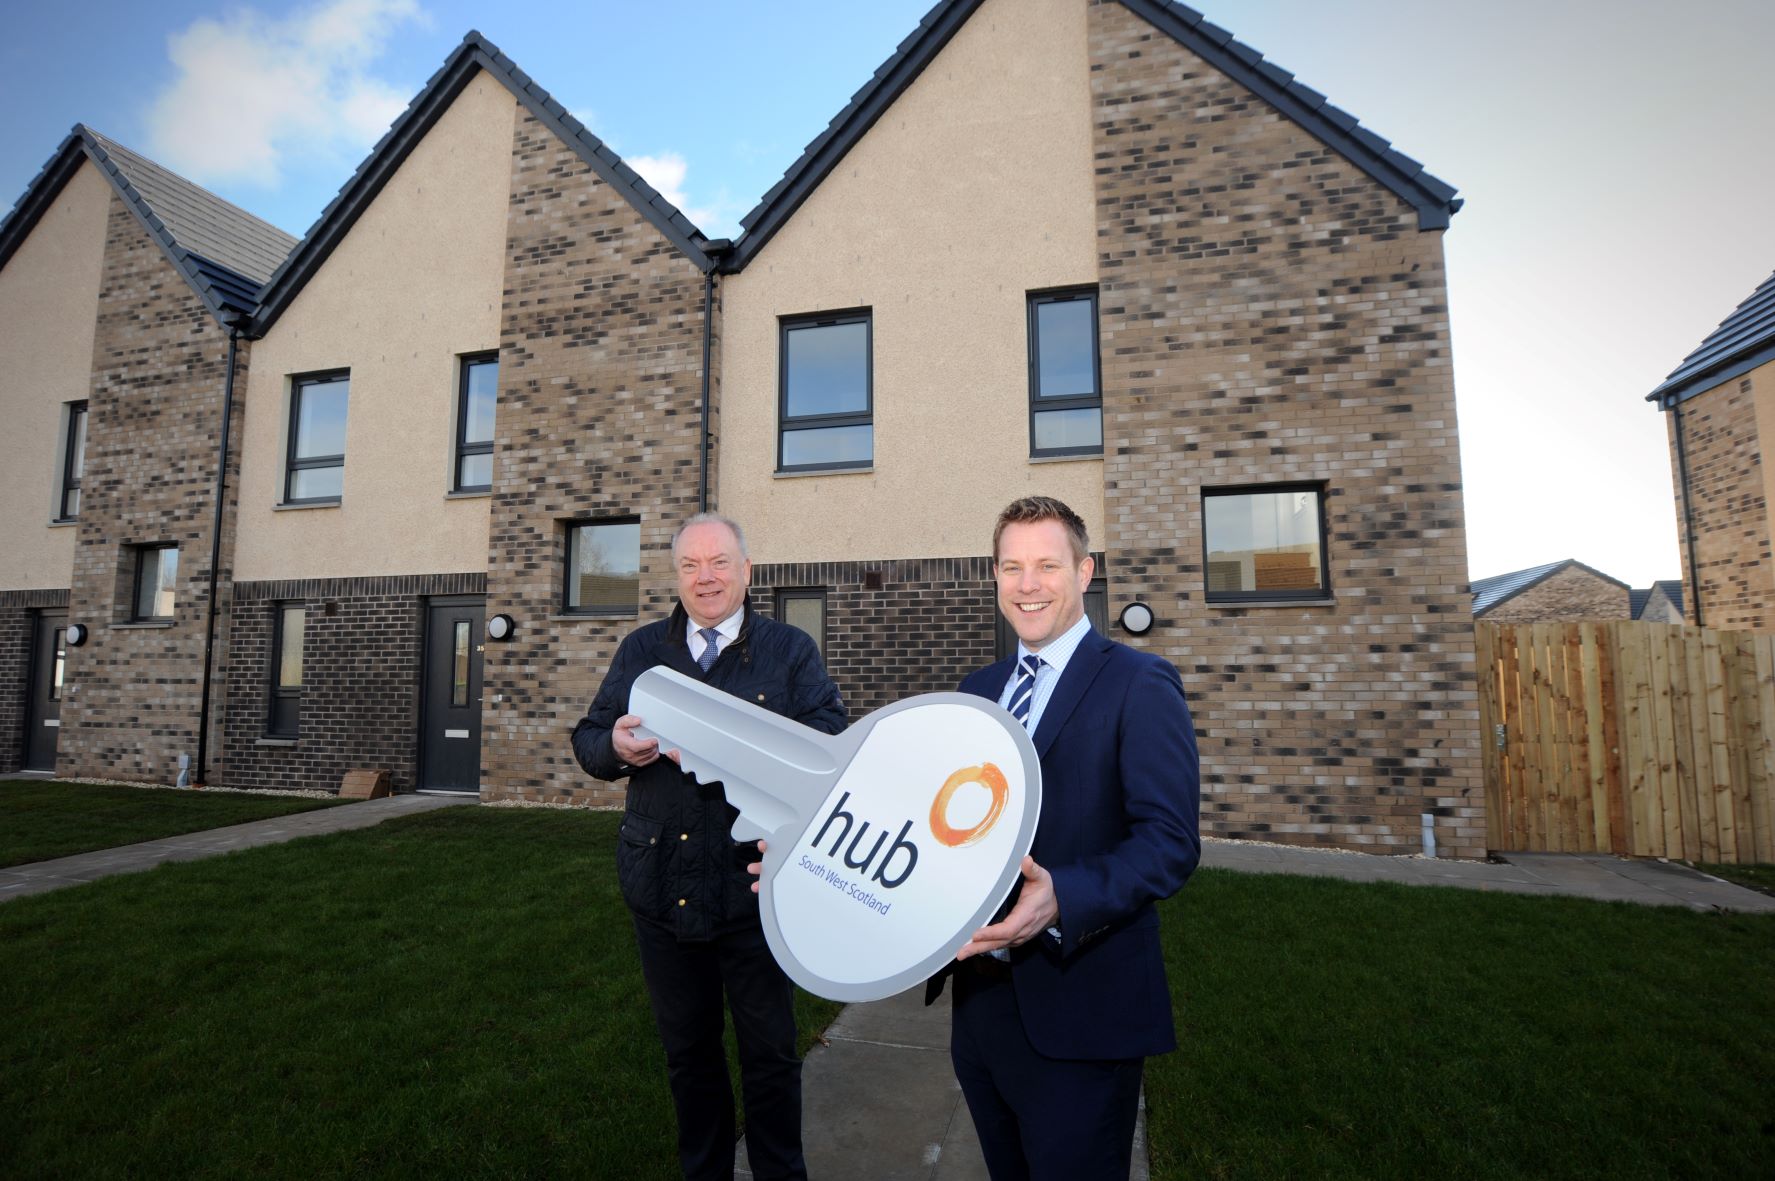 hub South West completes 500th home